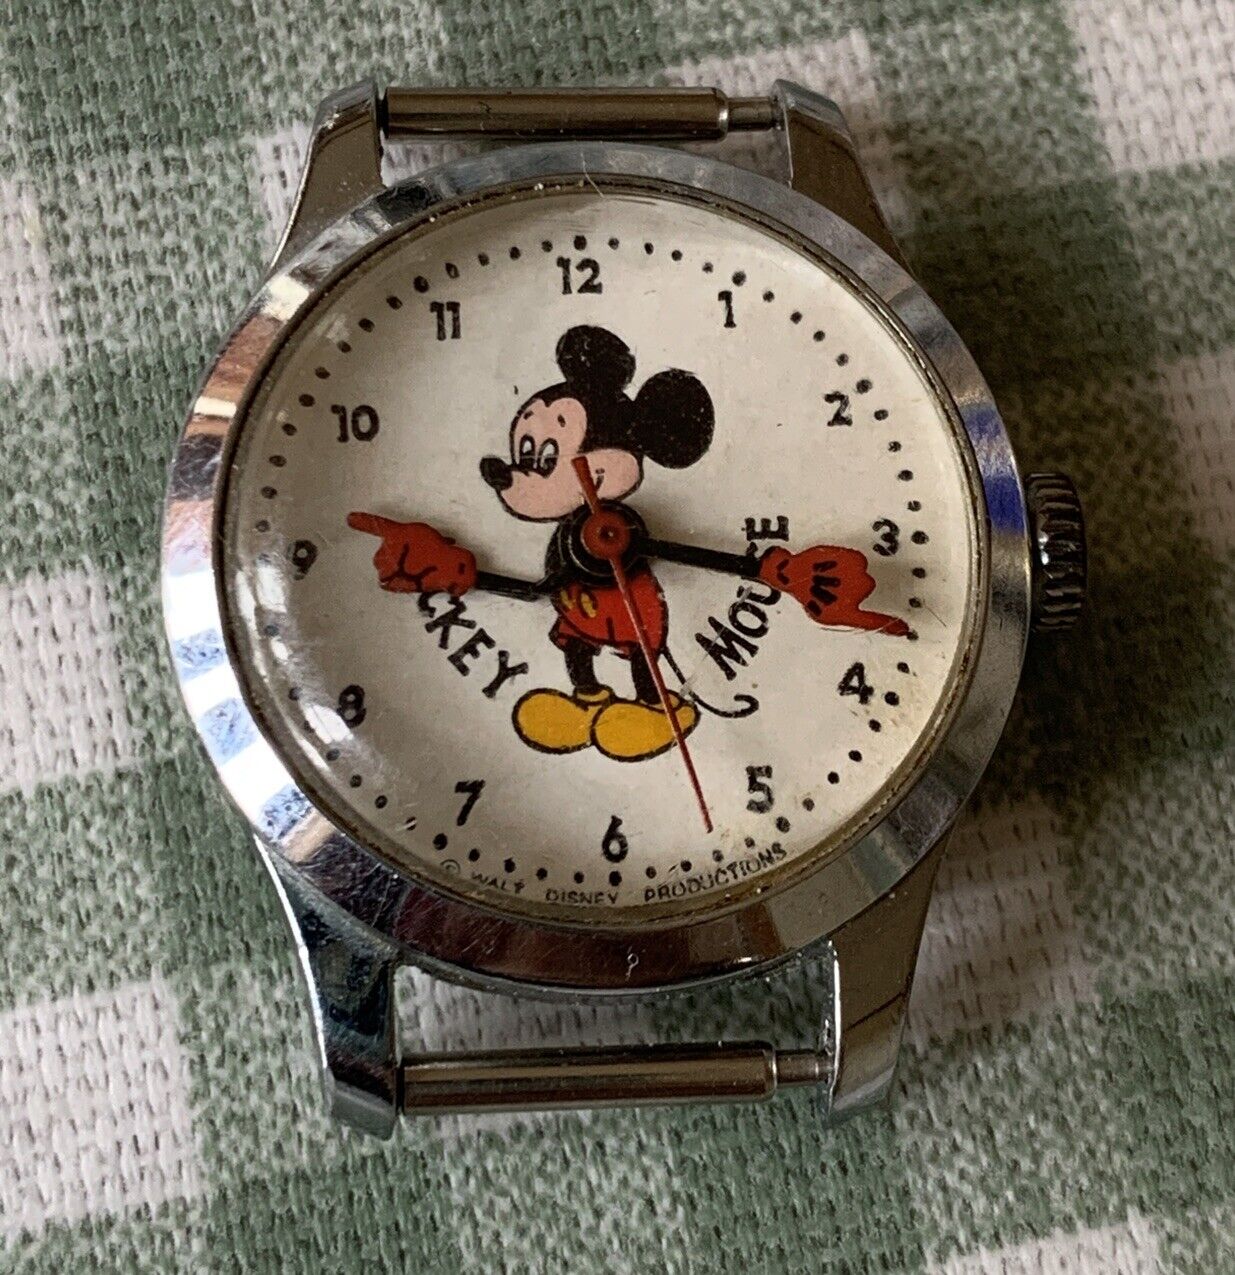 1970s Disney Mickey Mouse Swiss Watch 10035 - Mechanical (wind up) and runs well